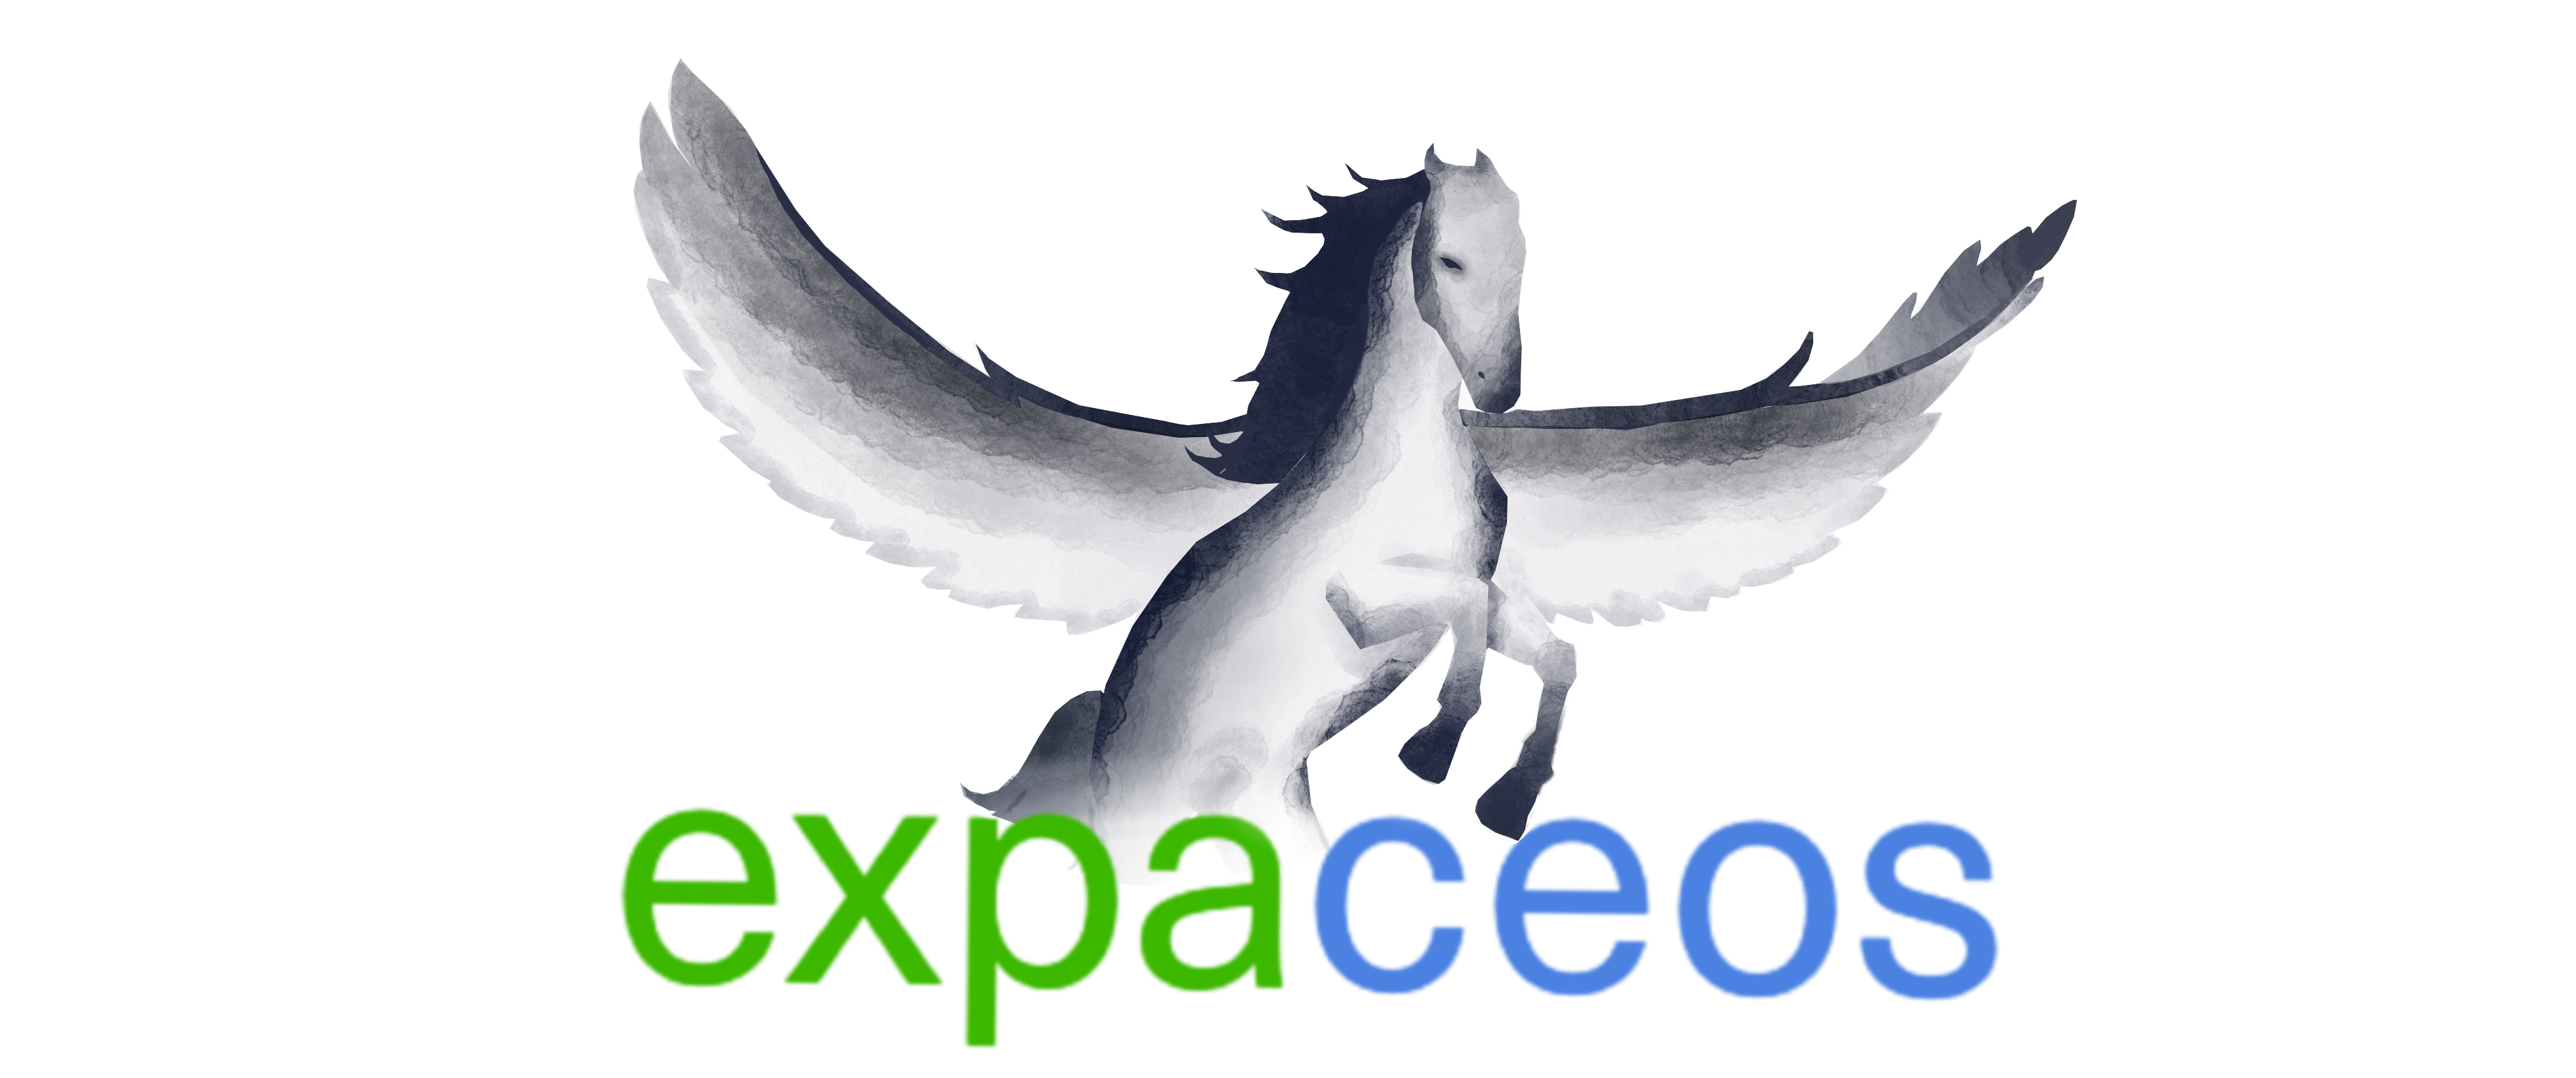 expaceos